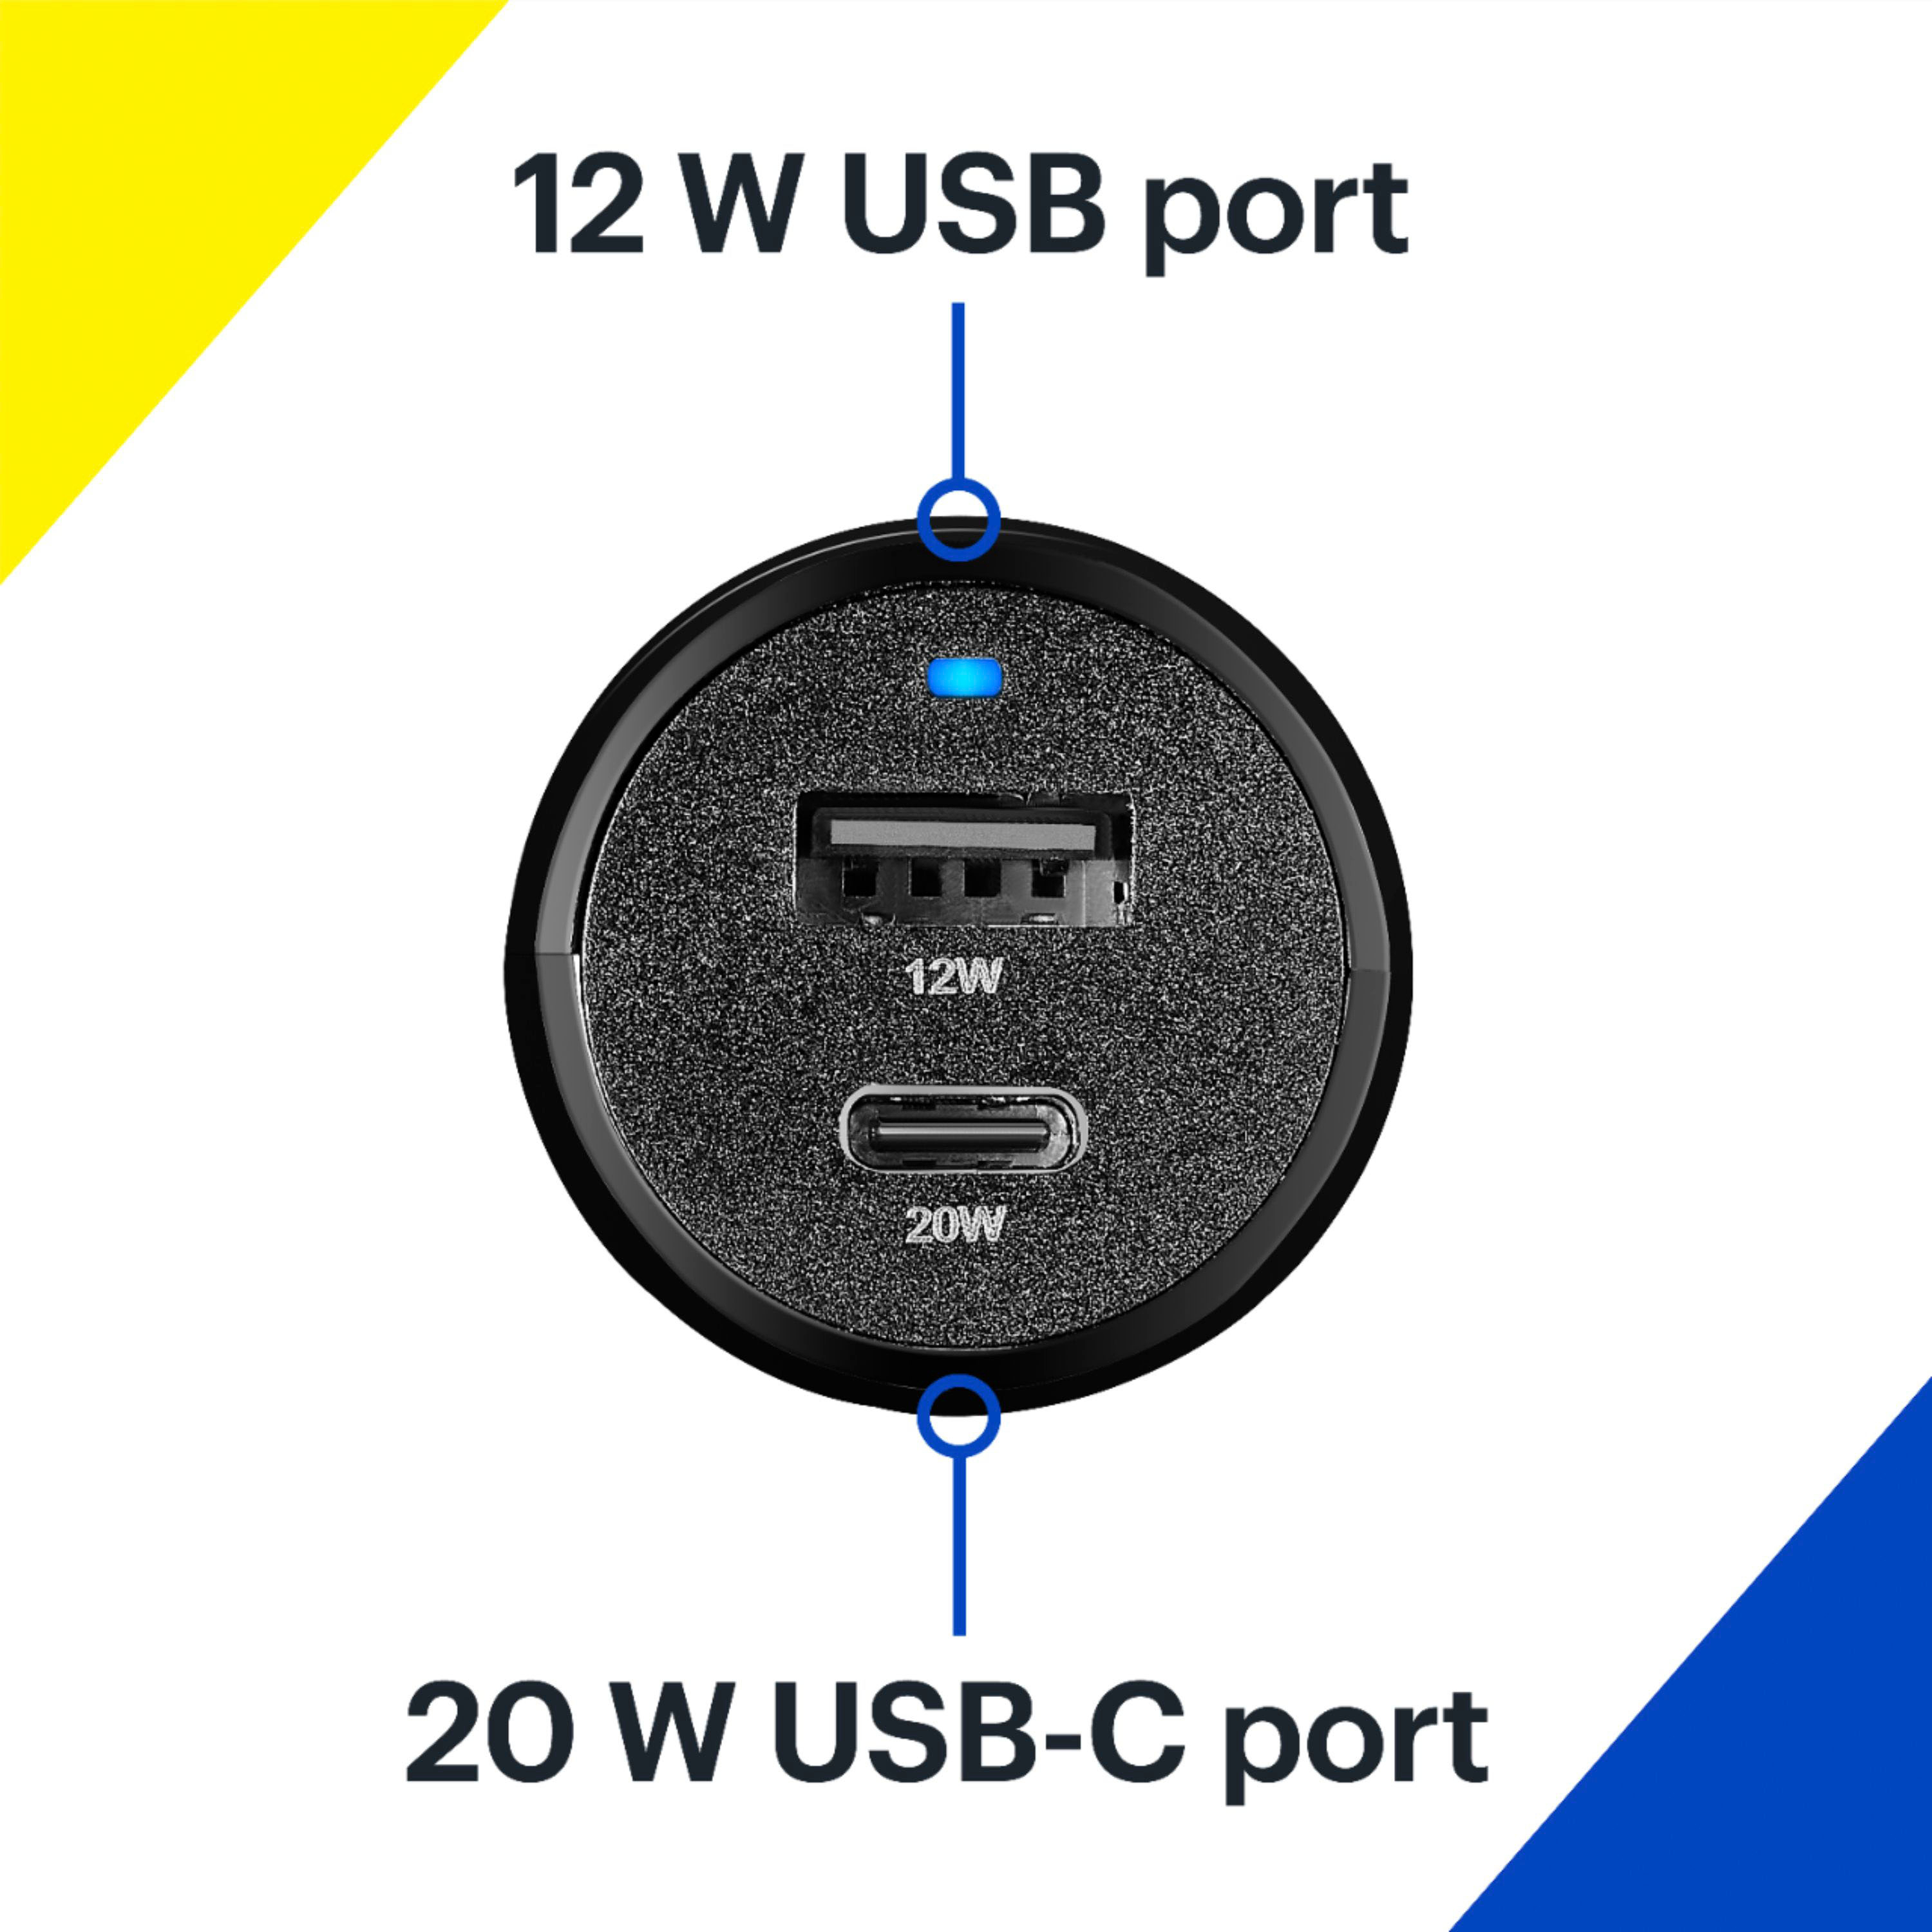 Best Buy essentials™ 32 W Vehicle Charger with 1 USB-C & 1 USB Port Black  BE-MVC32W22K - Best Buy